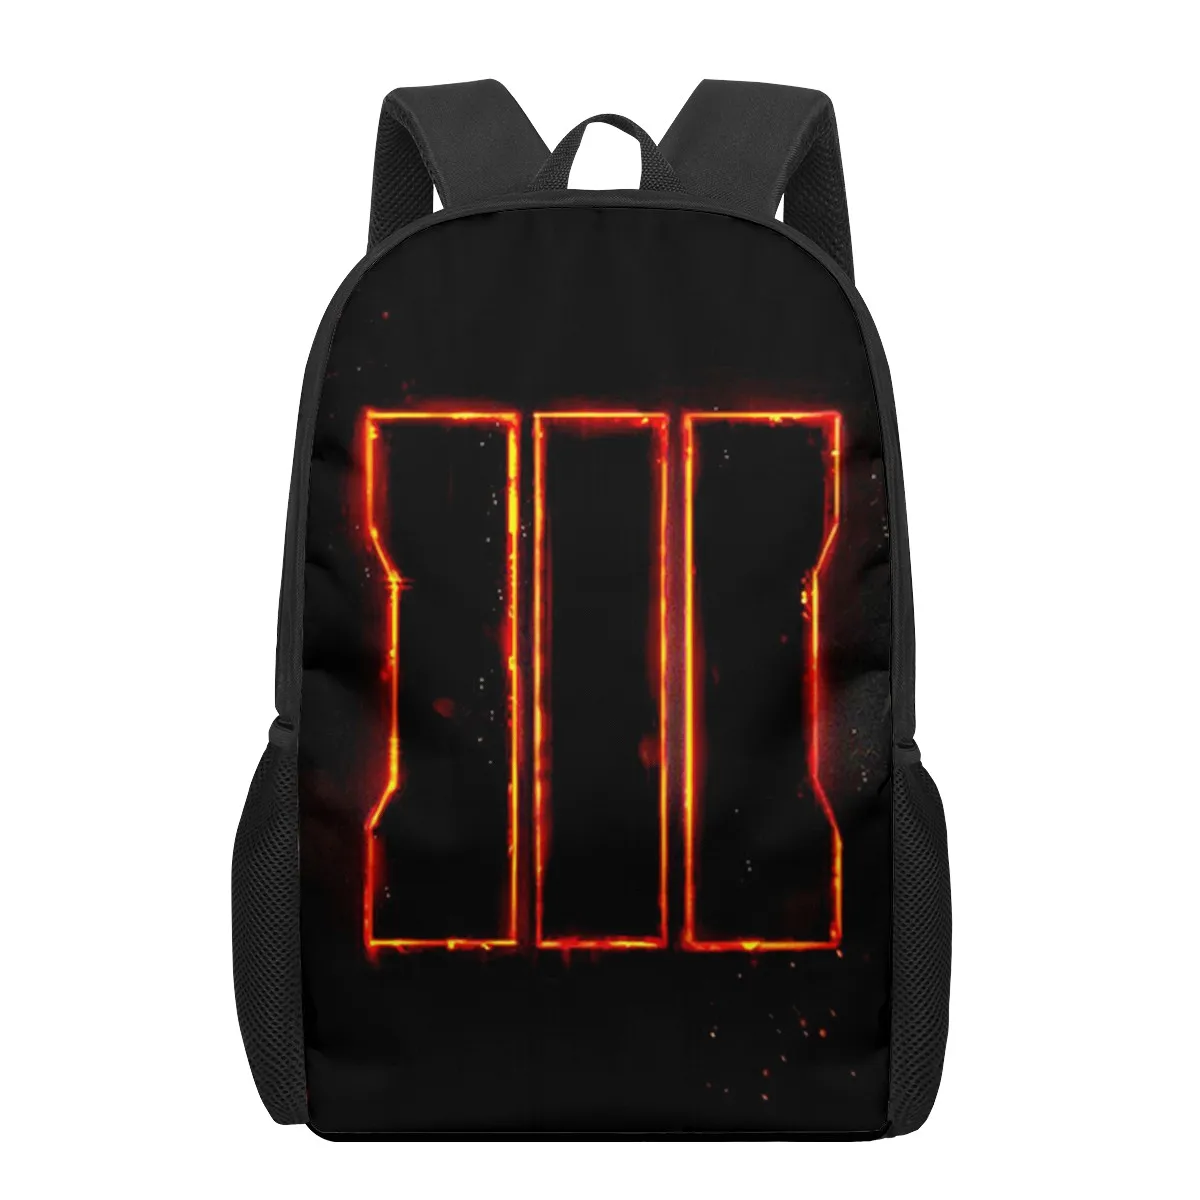 Call of Duty COD 3D Print School Backpack for Boys Girls Teenager Kids Book Bag Casual Shoulder Bags 16Inch